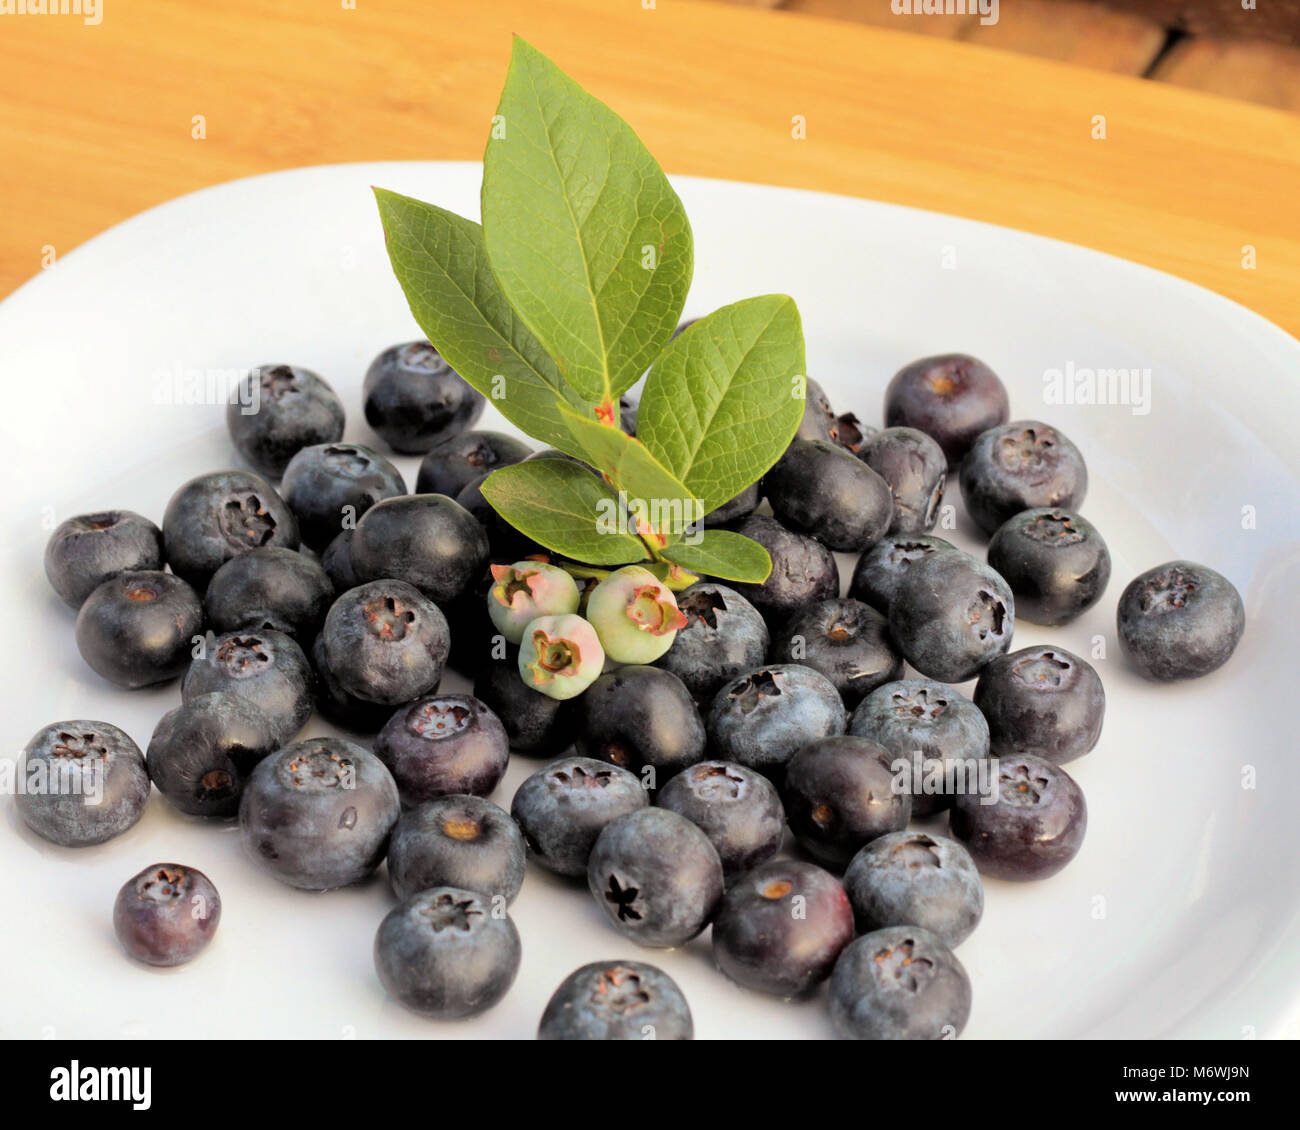 Unripe blueberries on a blueberry twig with leaves sit atop a pile of ripe blueberries on a white plate. Stock Photo